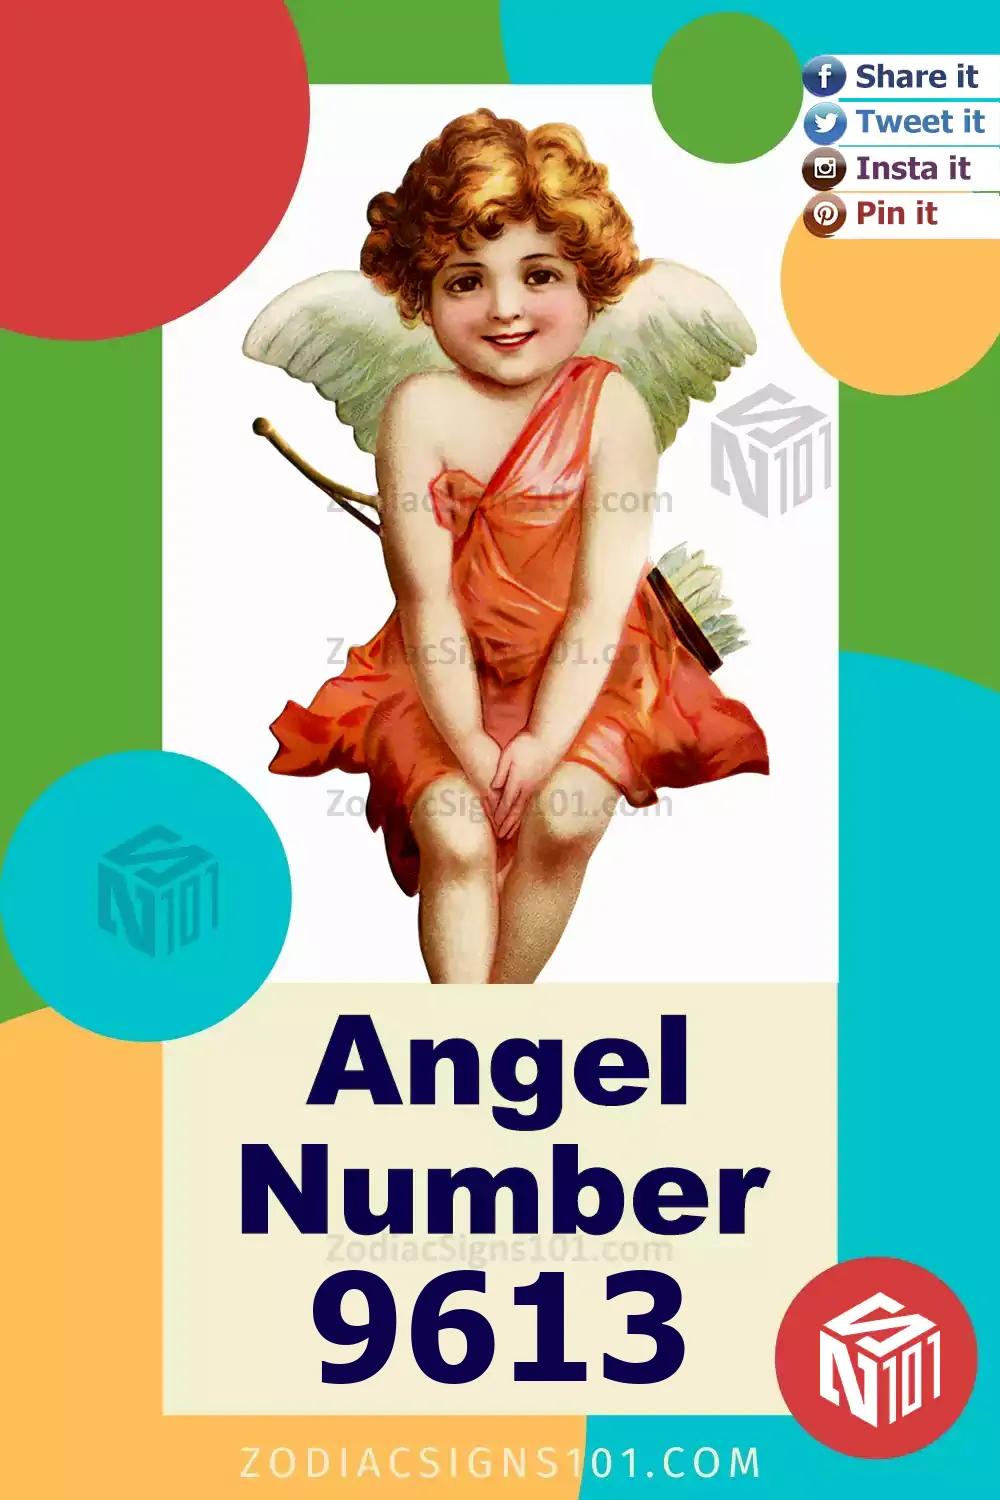 9613 Angel Number Meaning